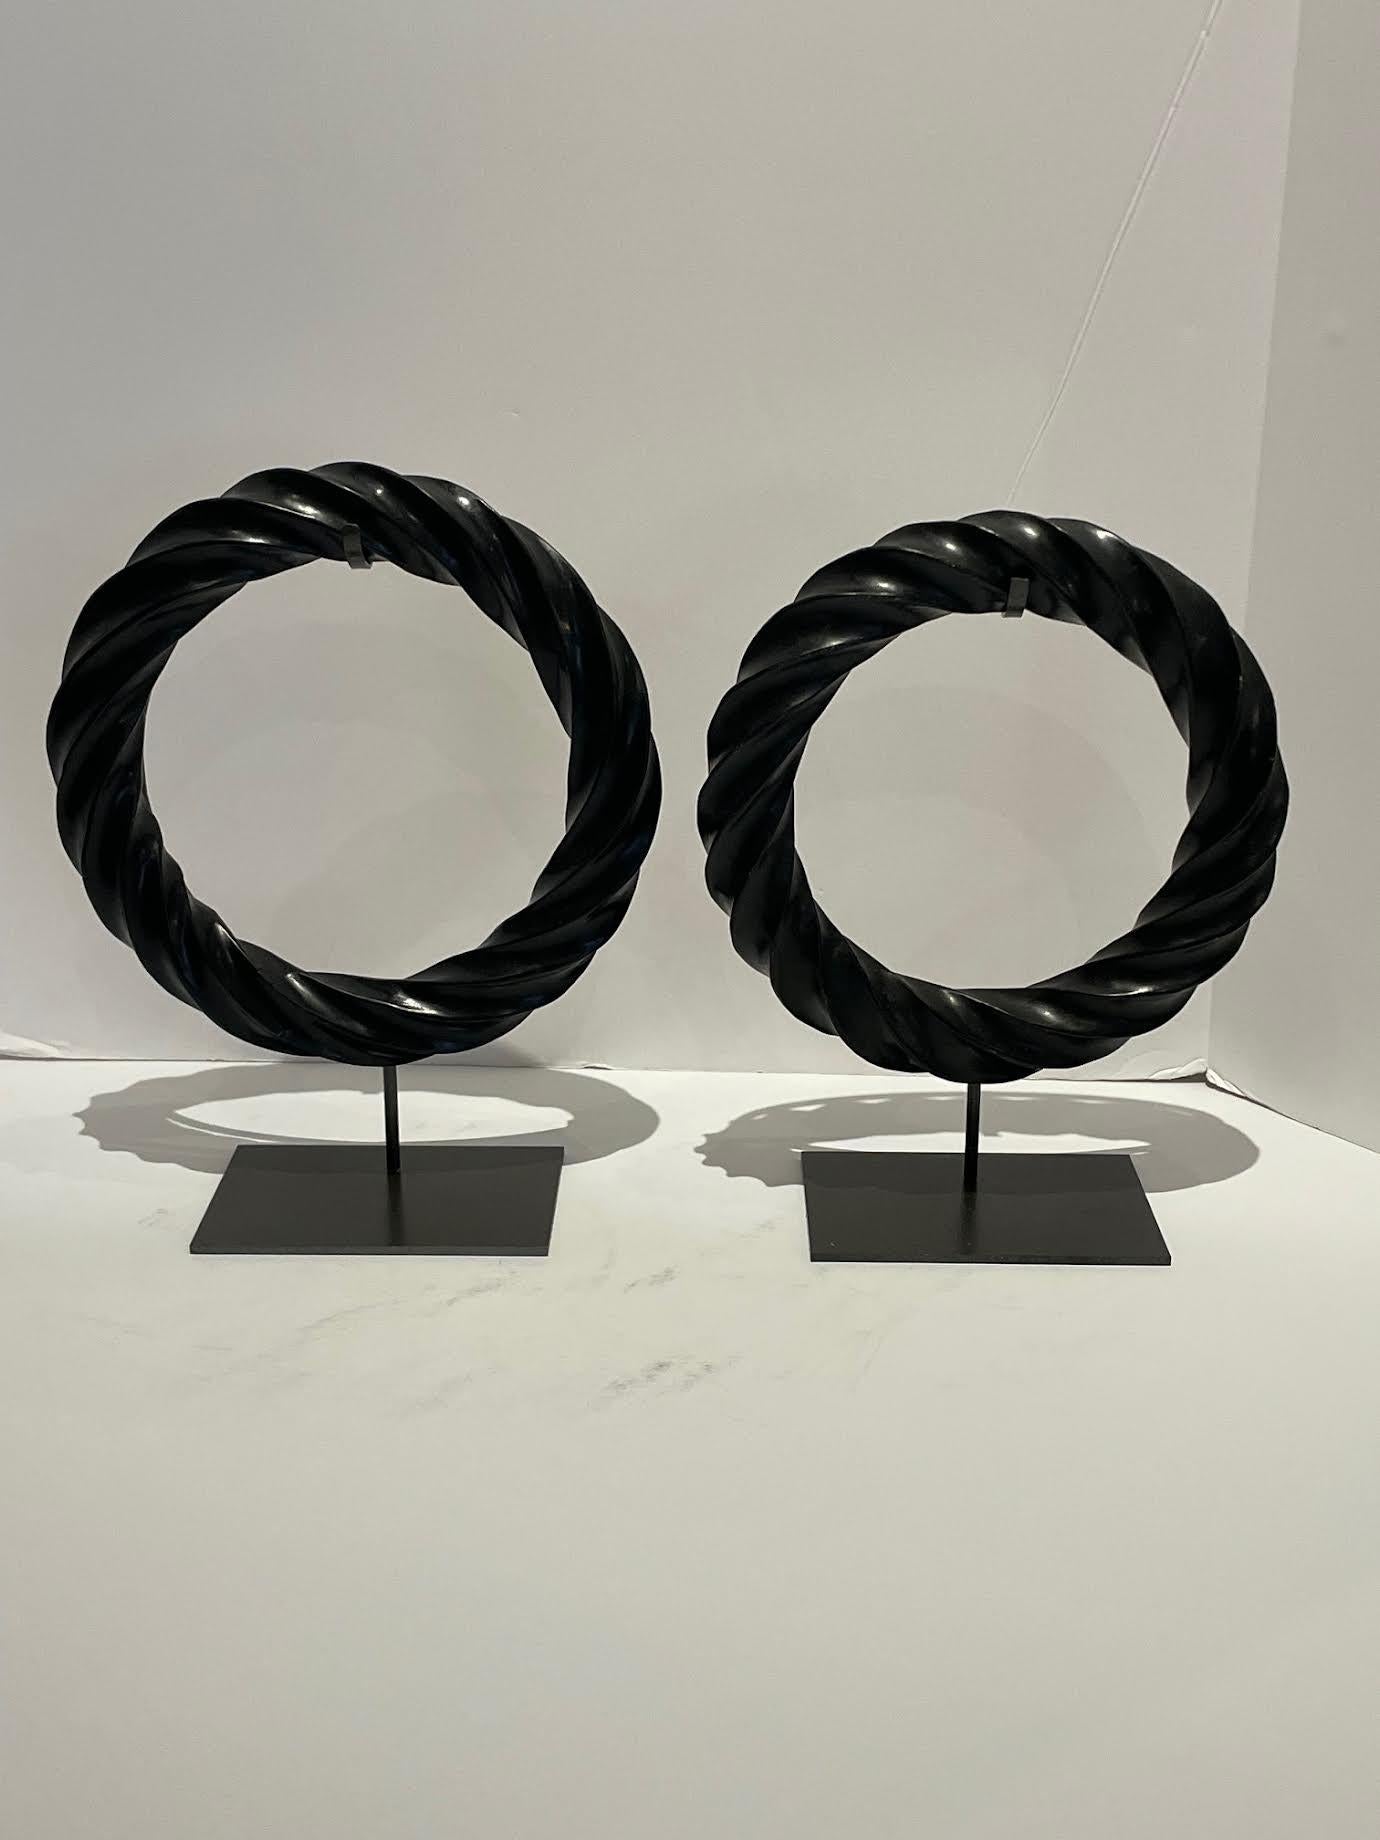 Black Rope Stone Set Of Two Rings On Stands, China, Contemporary In New Condition For Sale In New York, NY